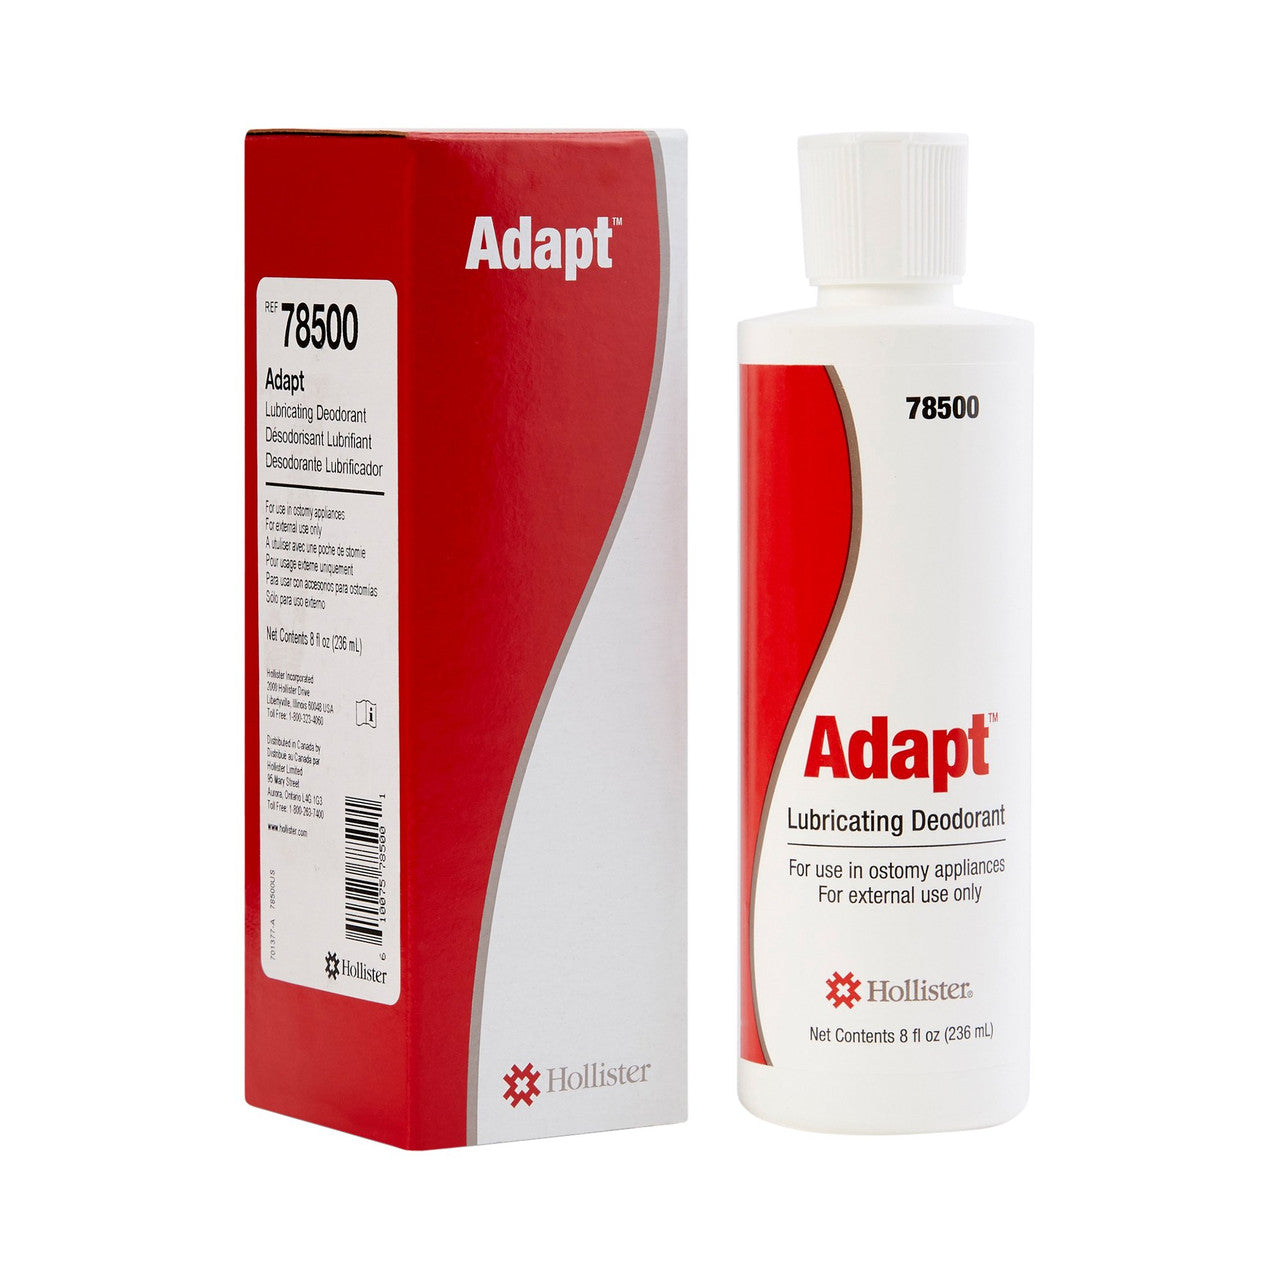 Adapt Lubricating Deodorant for Ostomy Pouches - 8 oz Bottle #78500 – My  DME Doc Medical Supplies